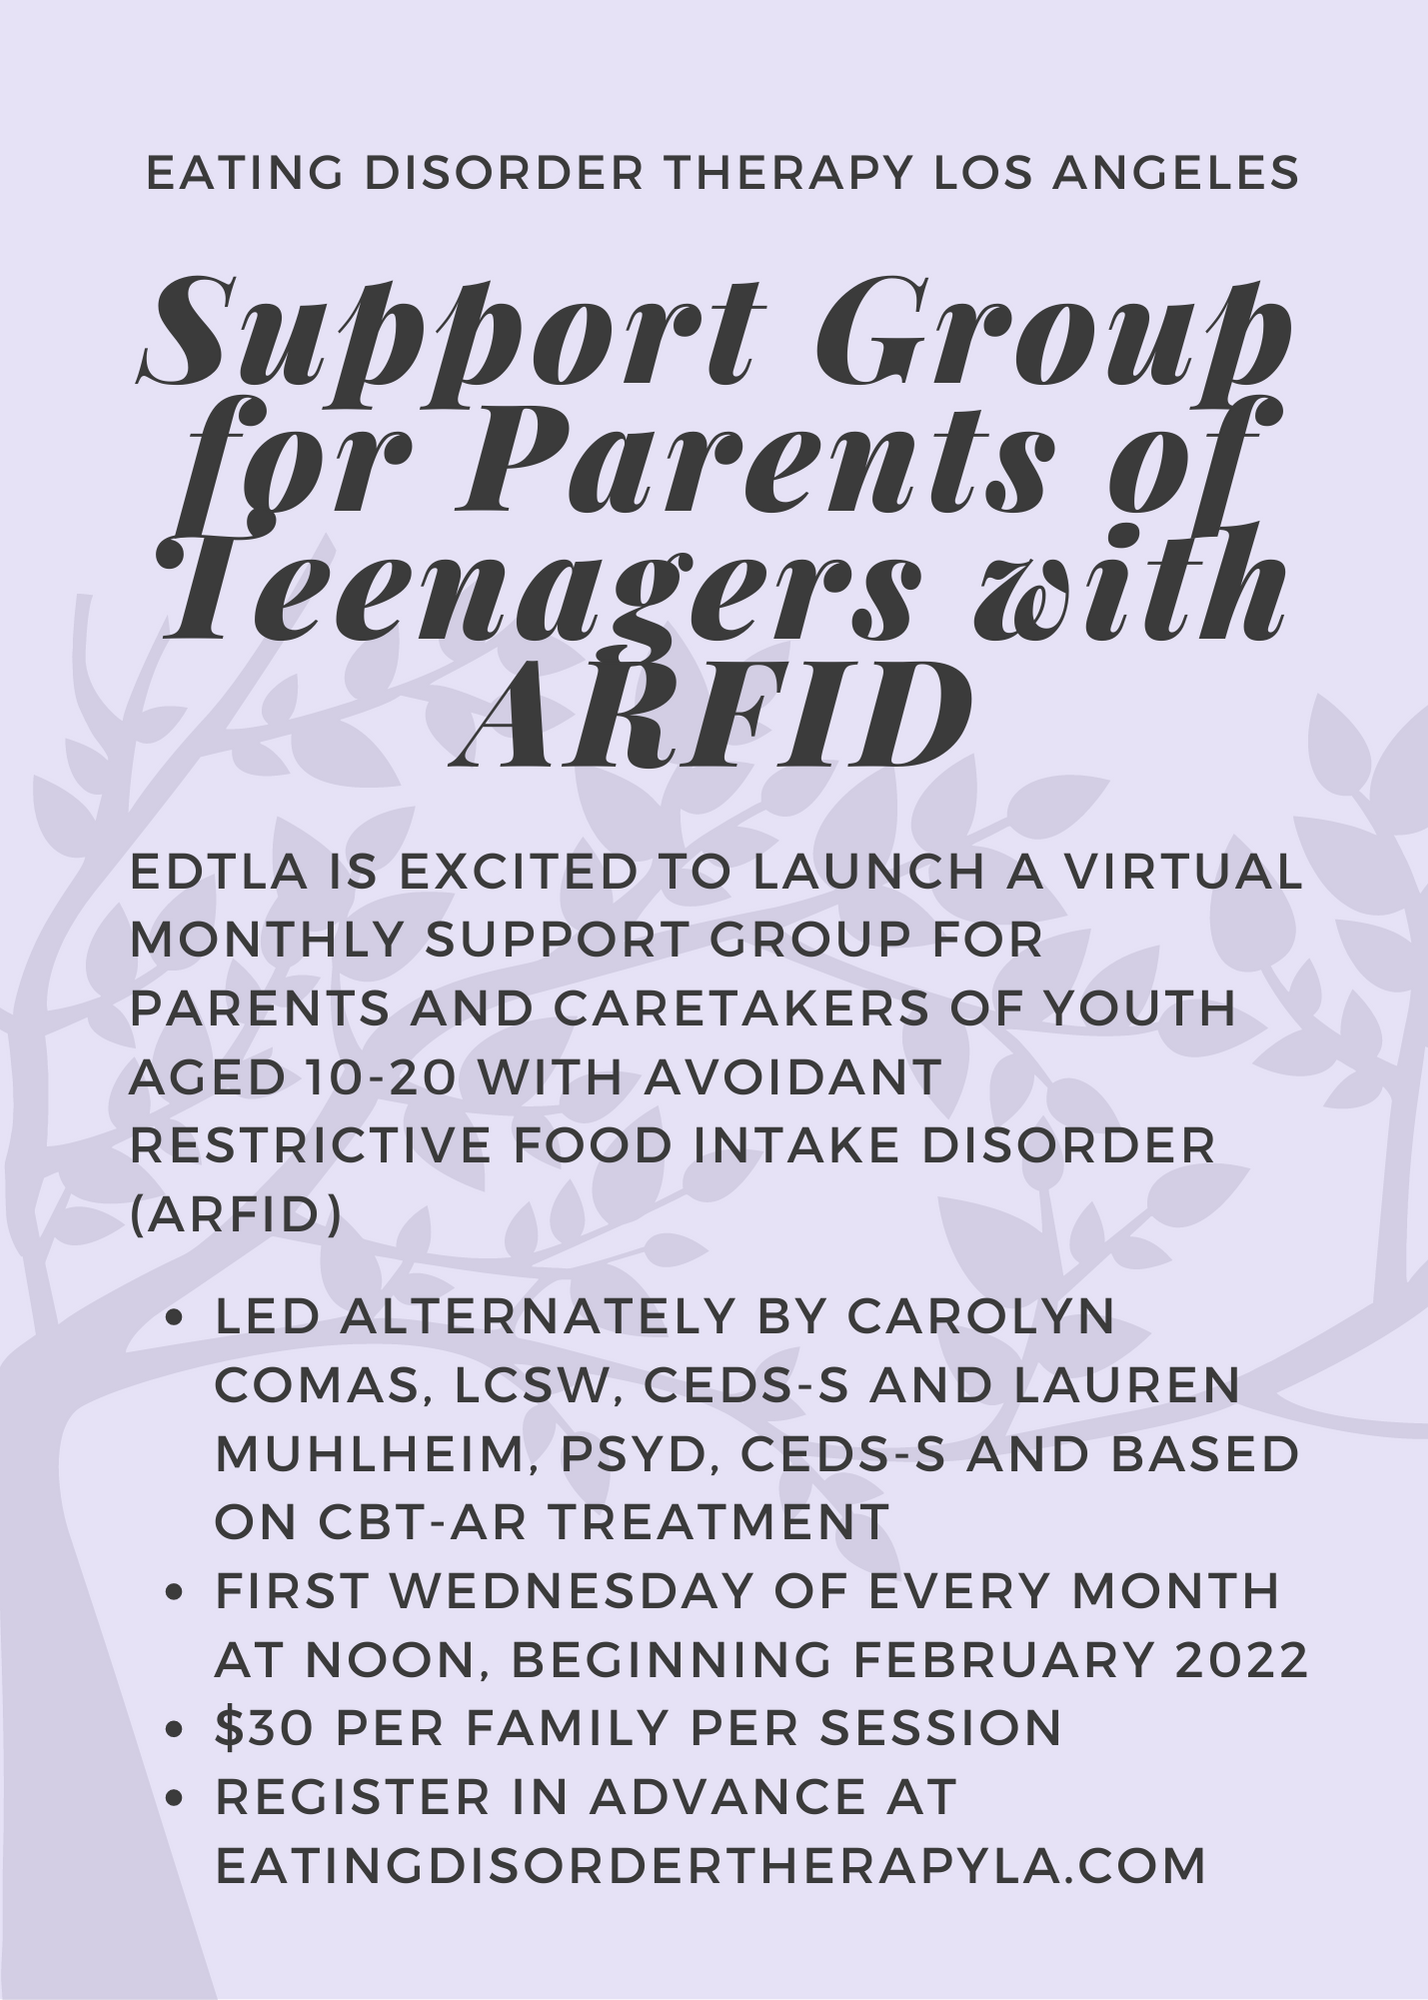 Support Group for Parents of Teenagers with ARFID